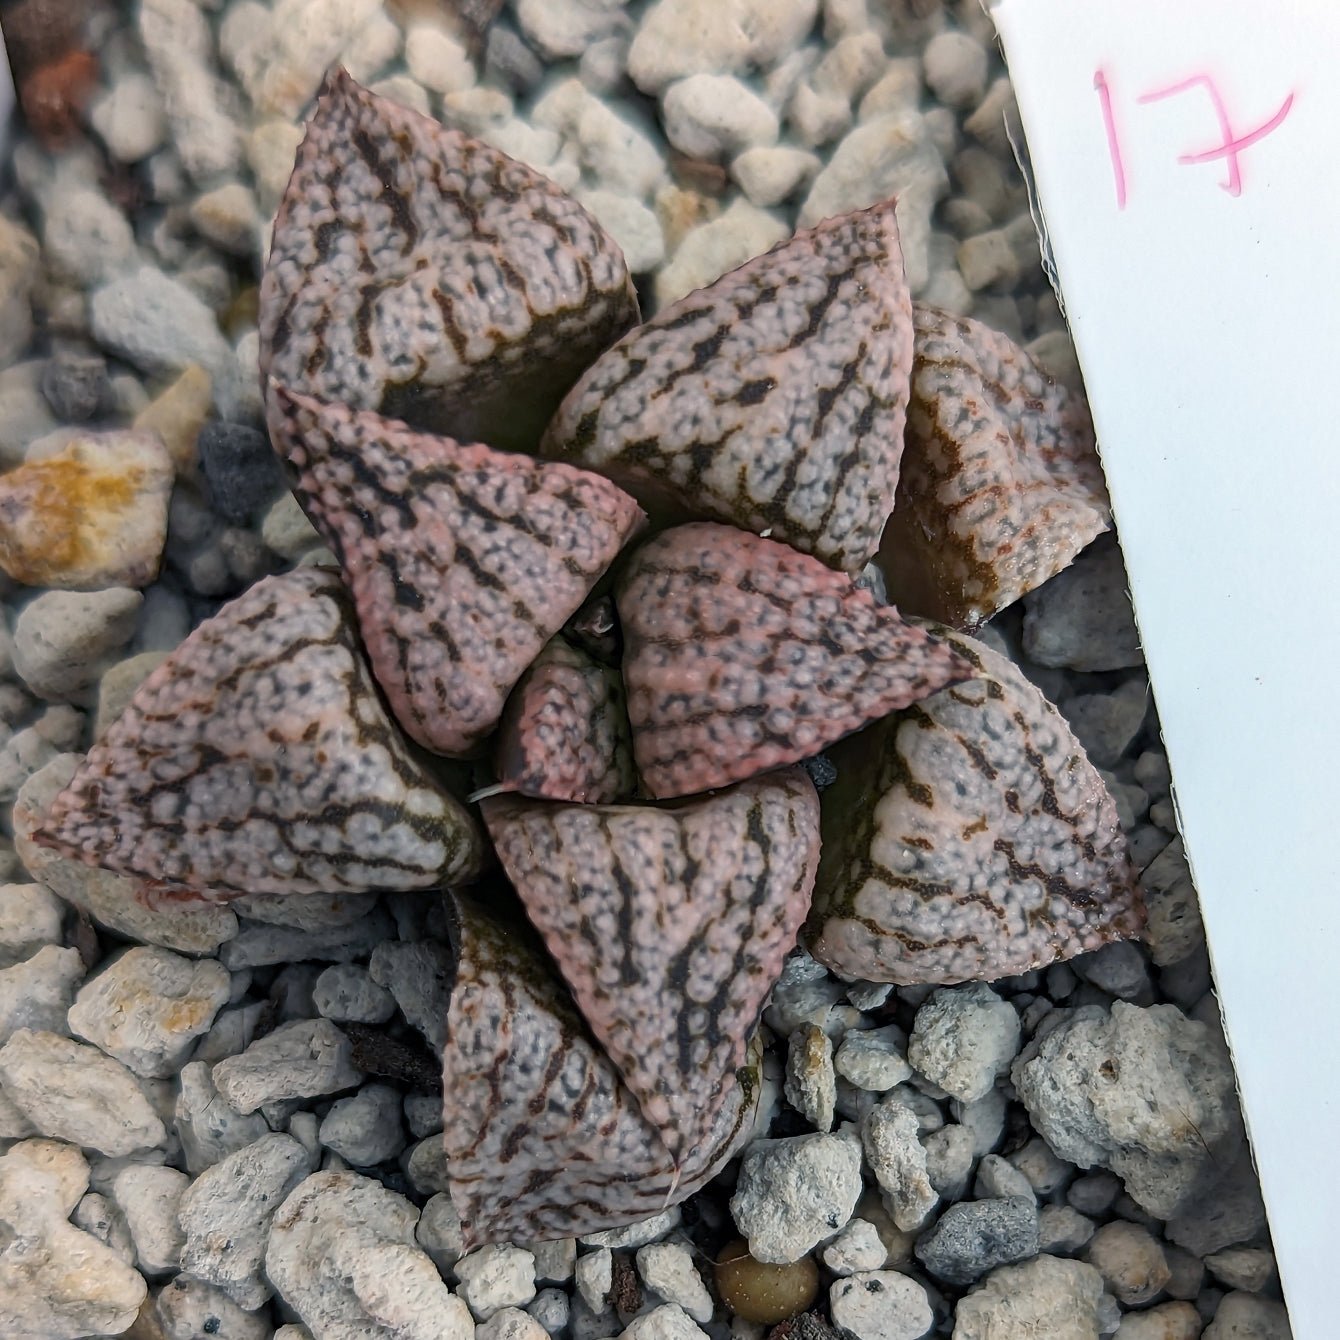 Haworthia "PP332" picta x Empress hybrid series #17 SOLD OUT